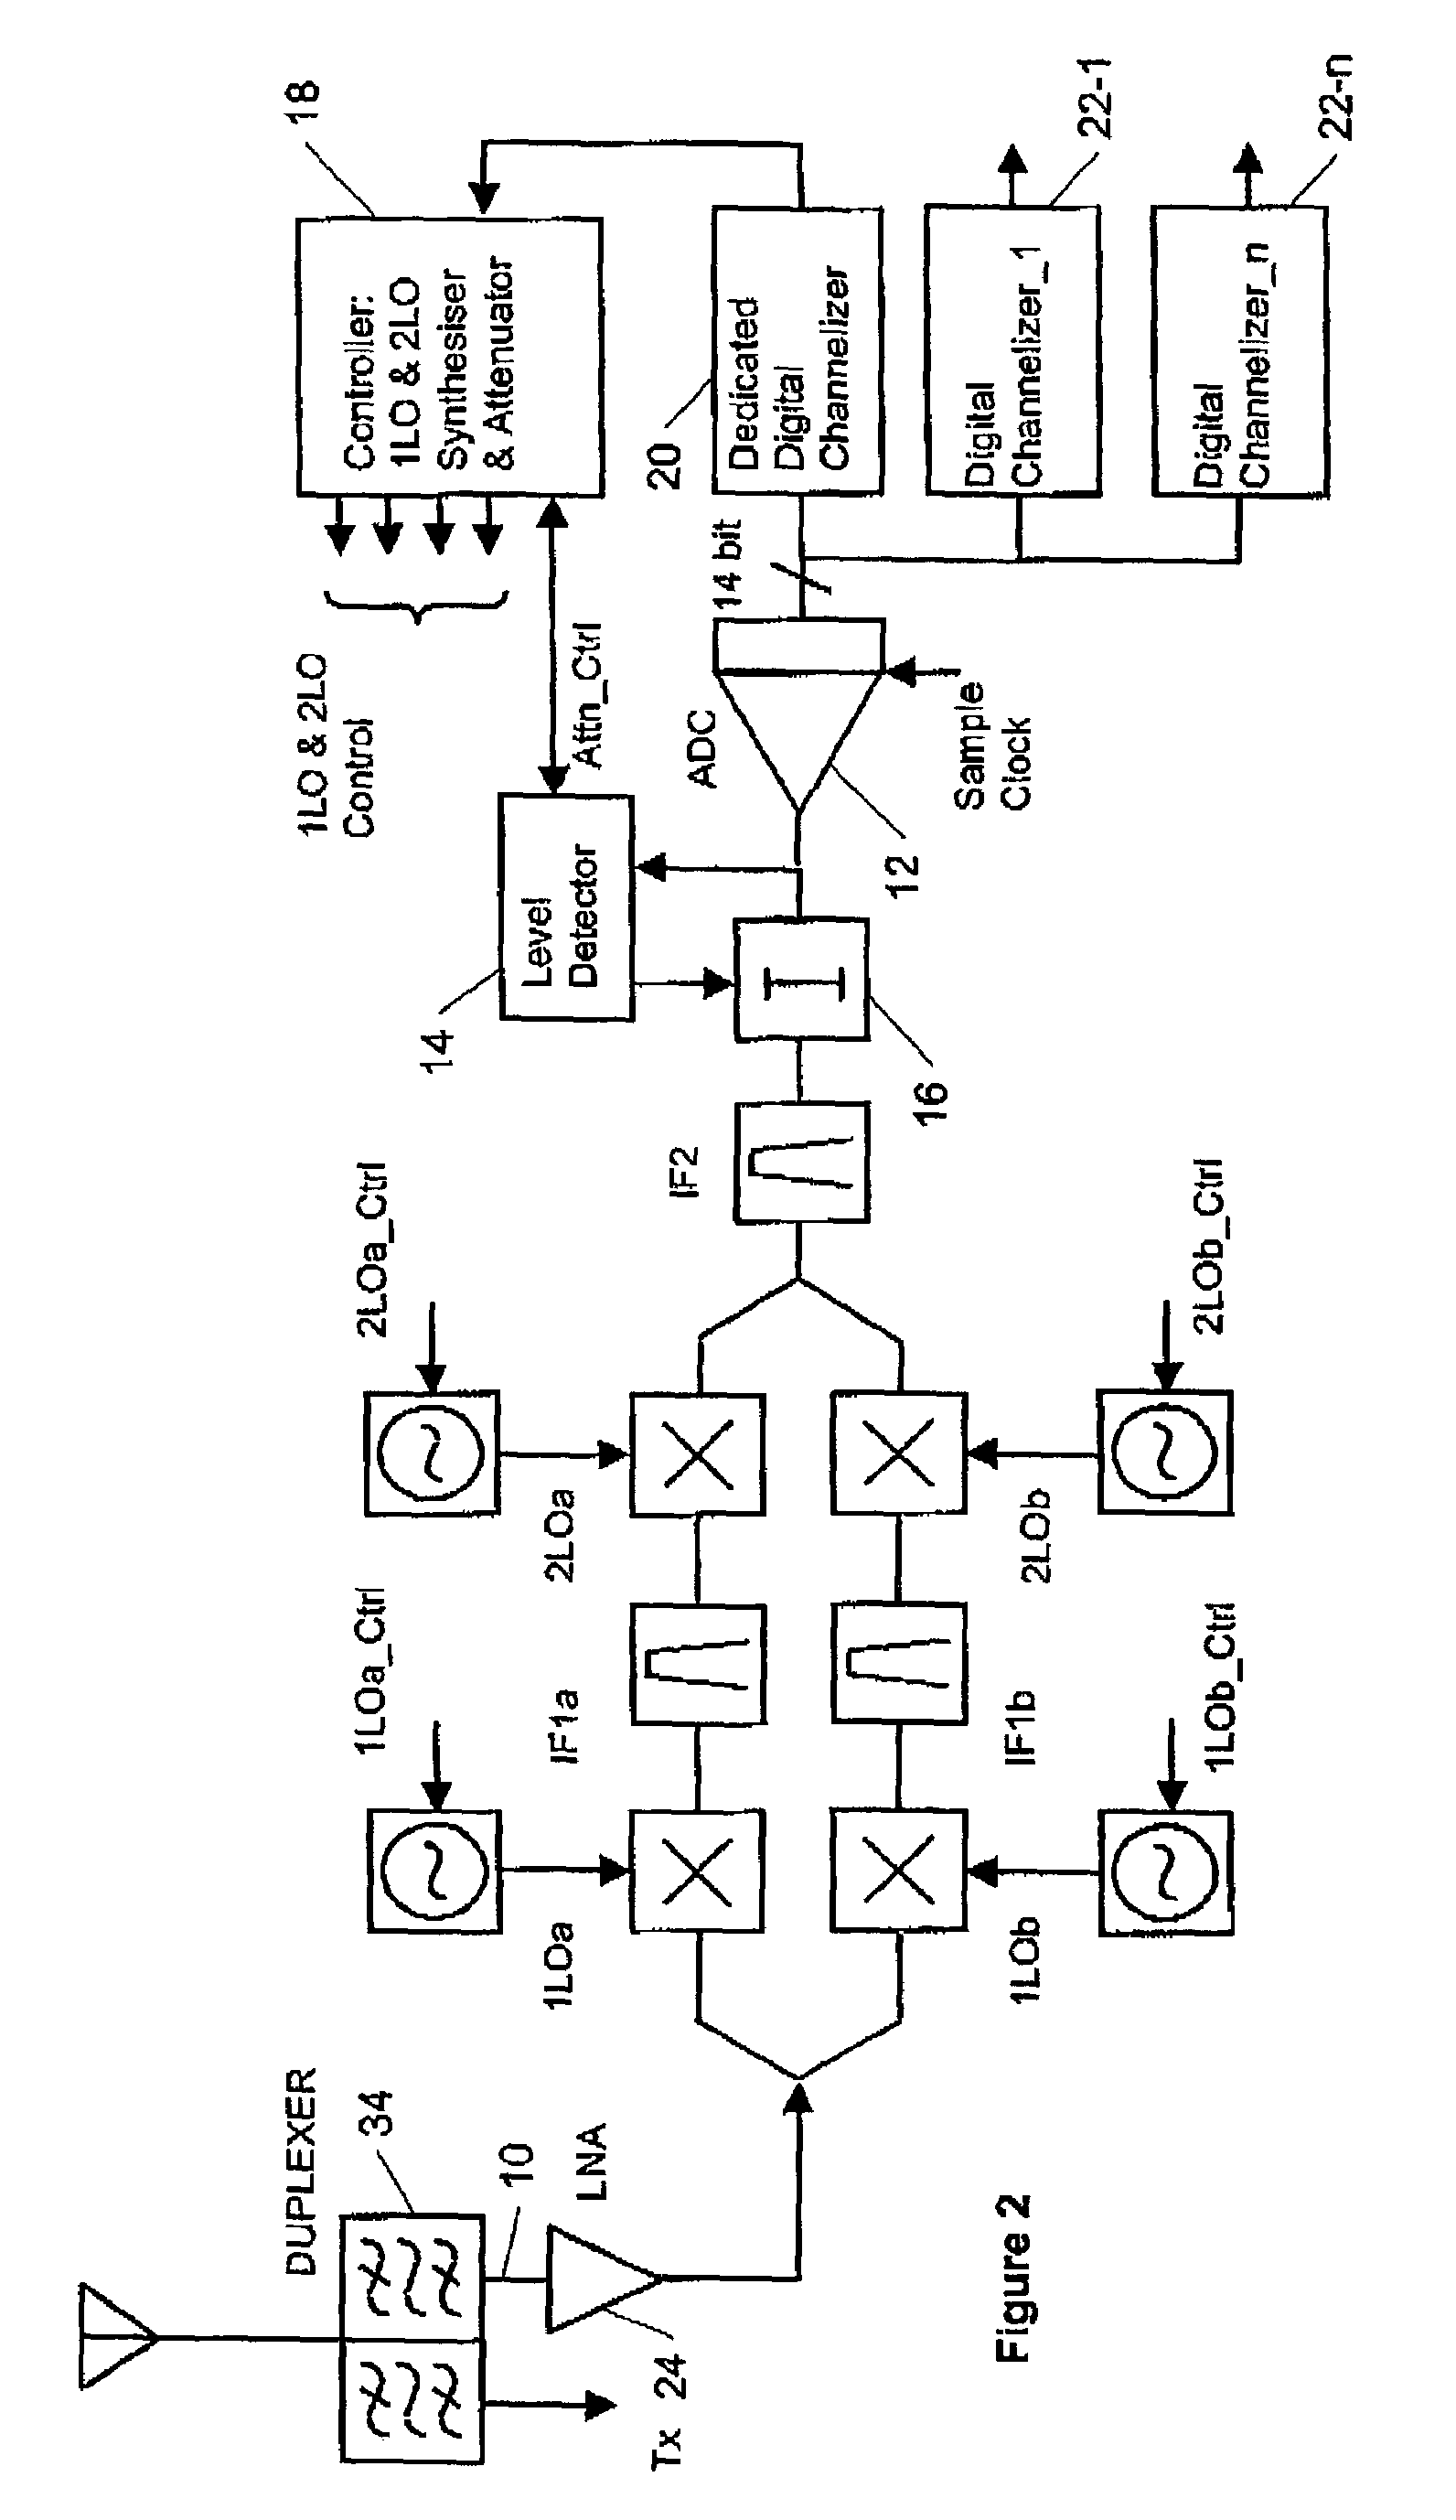 Interference rejection in a radio receiver